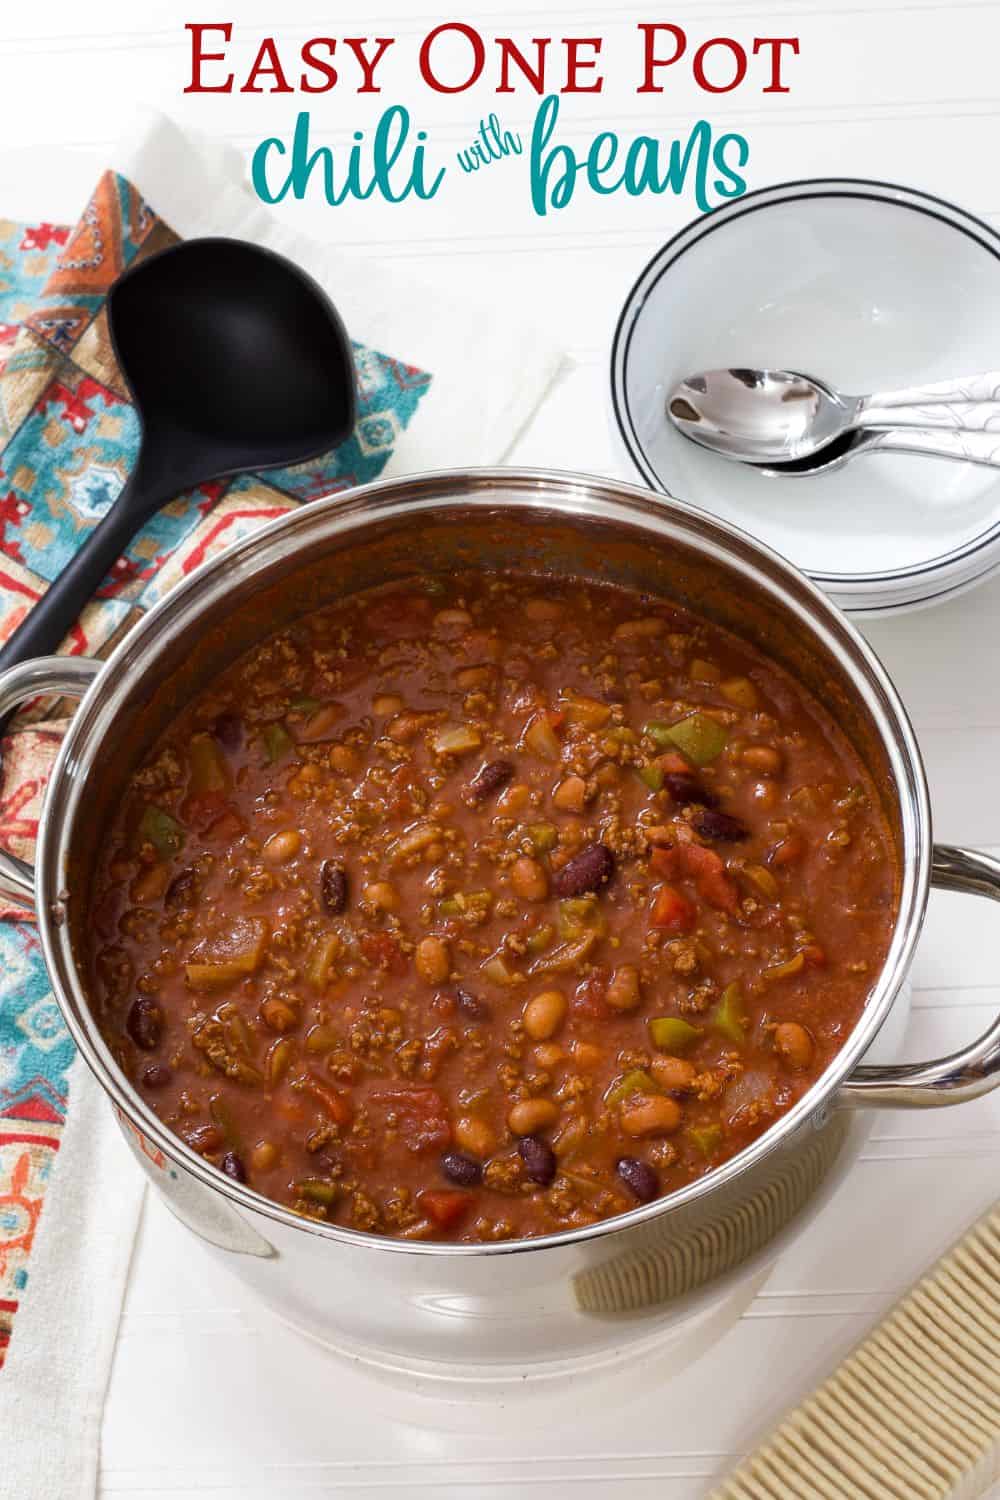 https://www.mindyscookingobsession.com/wp-content/uploads/2022/11/Easy-One-Pot-Chili-with-Beans-1.jpg